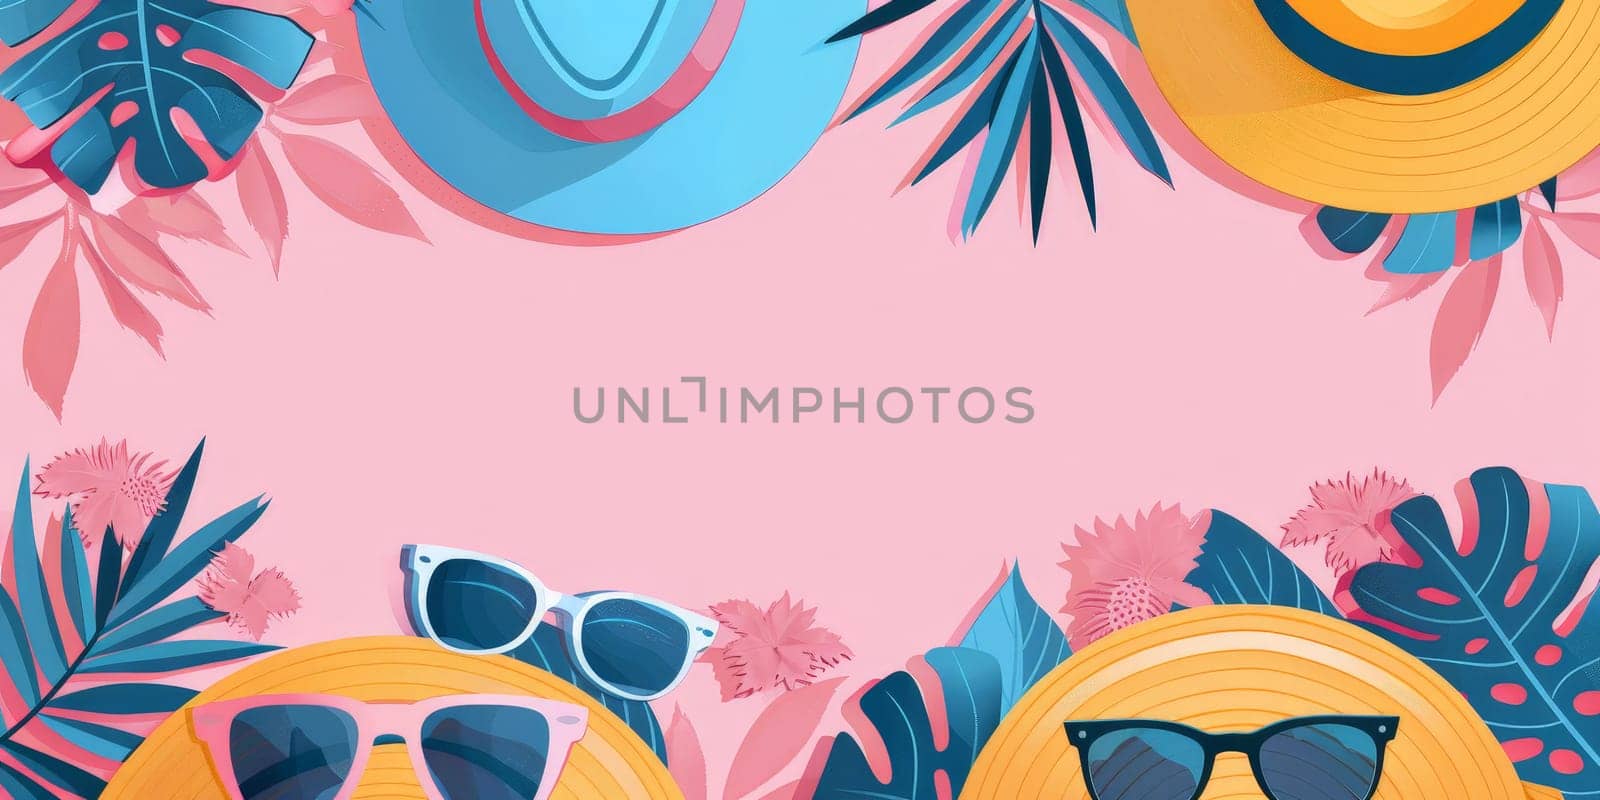 A pink background with a leafy border and a hat and sunglasses on it